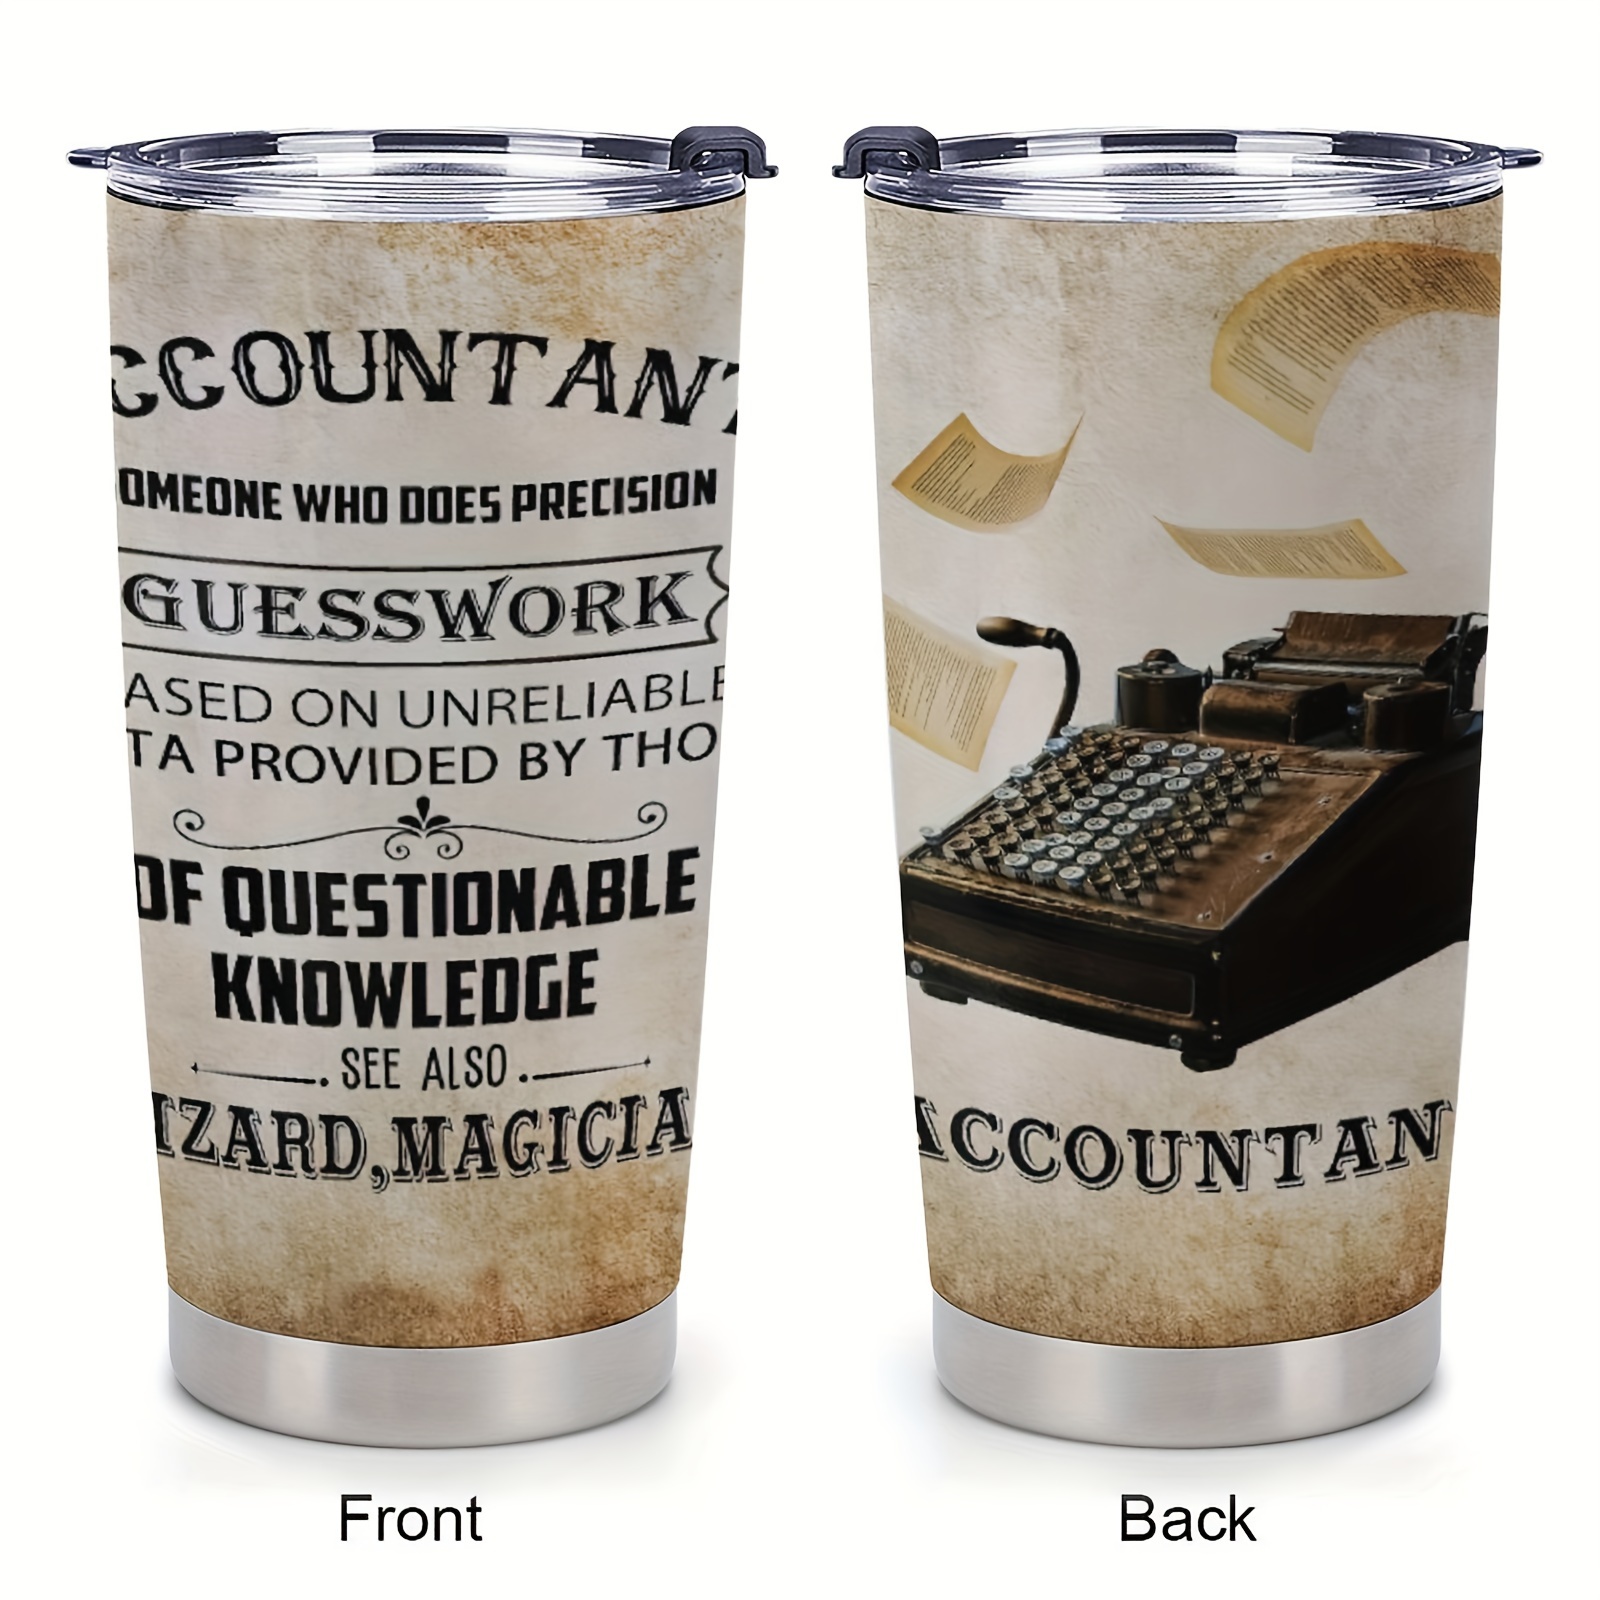 

1pc 20oz Accountant Tumbler Mug Vintage Accounting Gifts For Coworkers Inspiration Quote Coffee Cup Insulated Accounting Student Mugs Cpa Gifts For Accountants Accounting Major